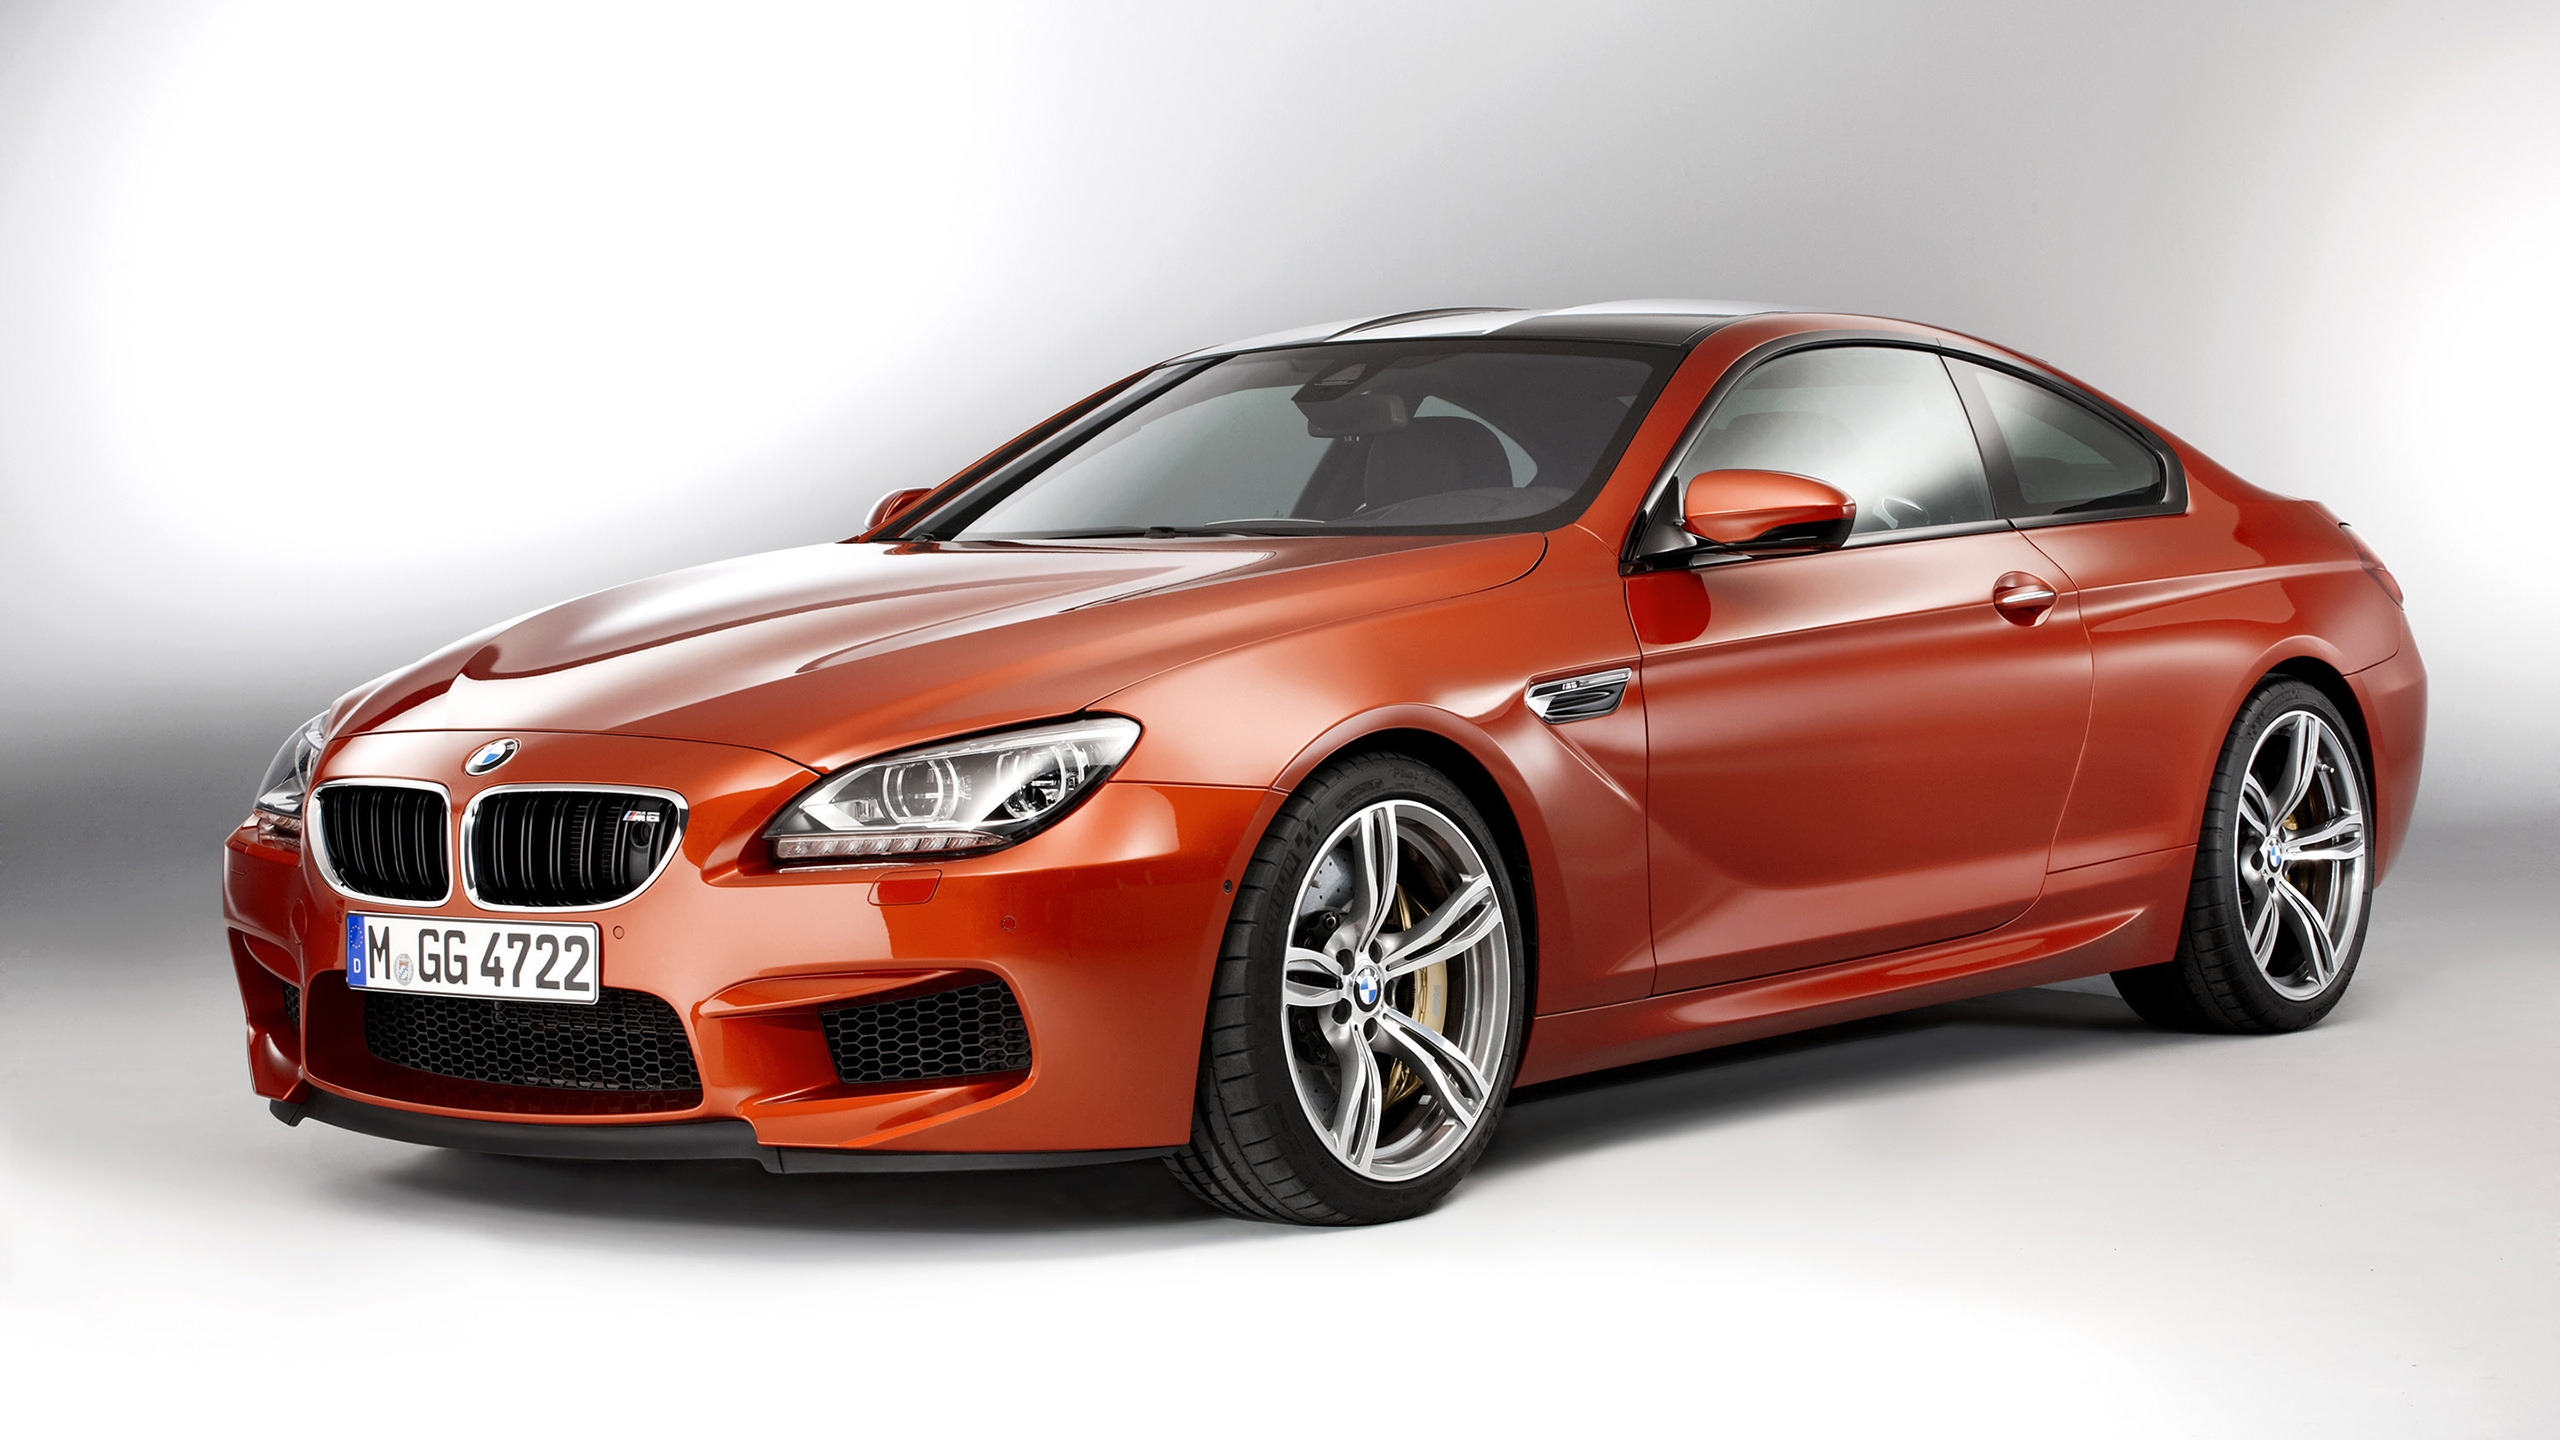 2013 BMW M6 Coupe Studio for 2560x1440 HDTV resolution